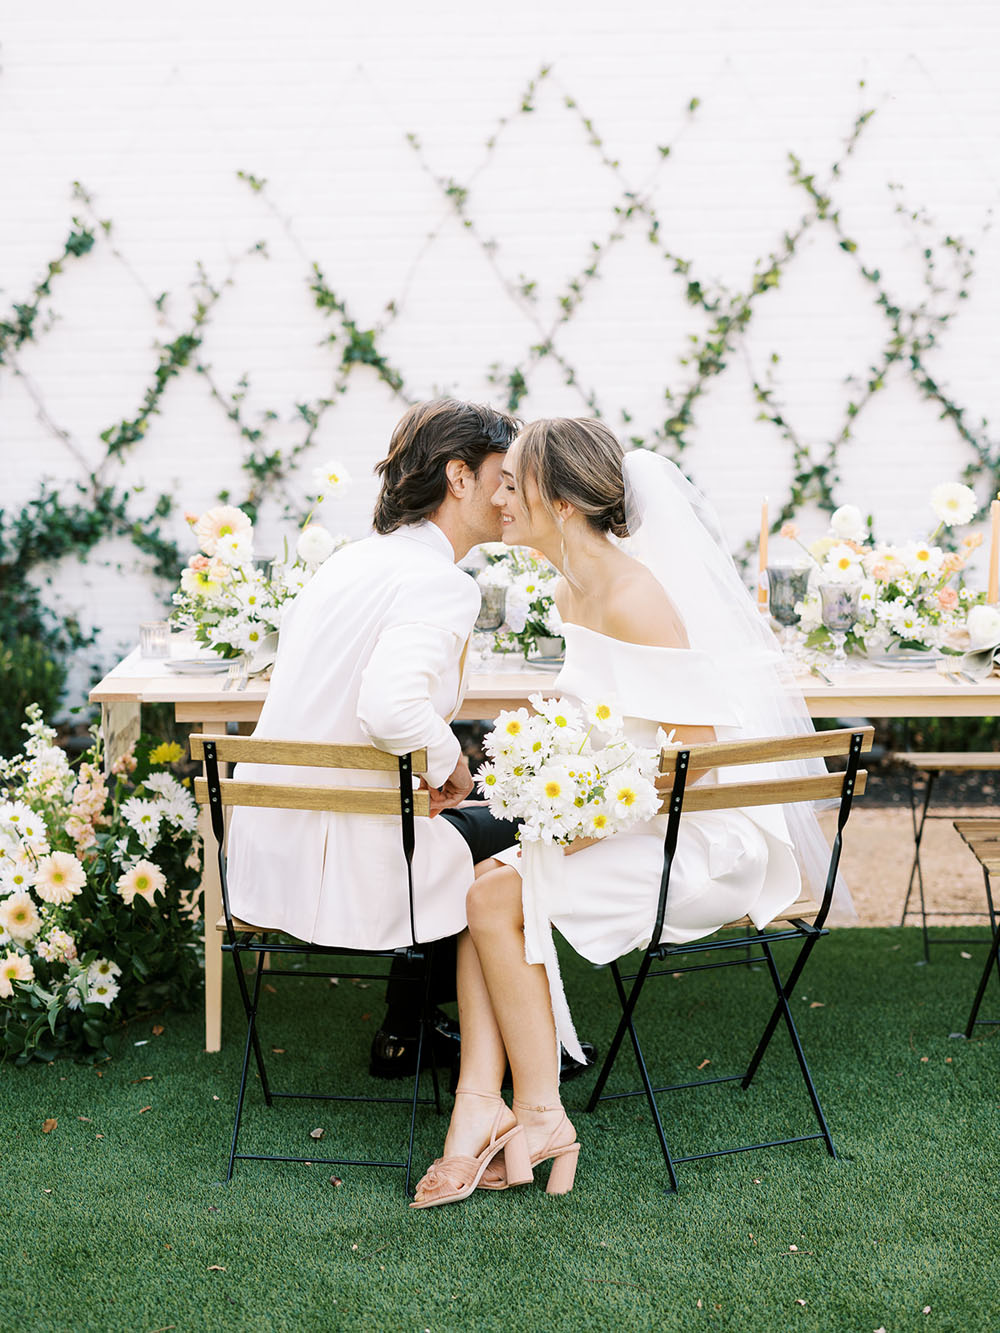 Garden inspired wedding with daisies and vintage touches